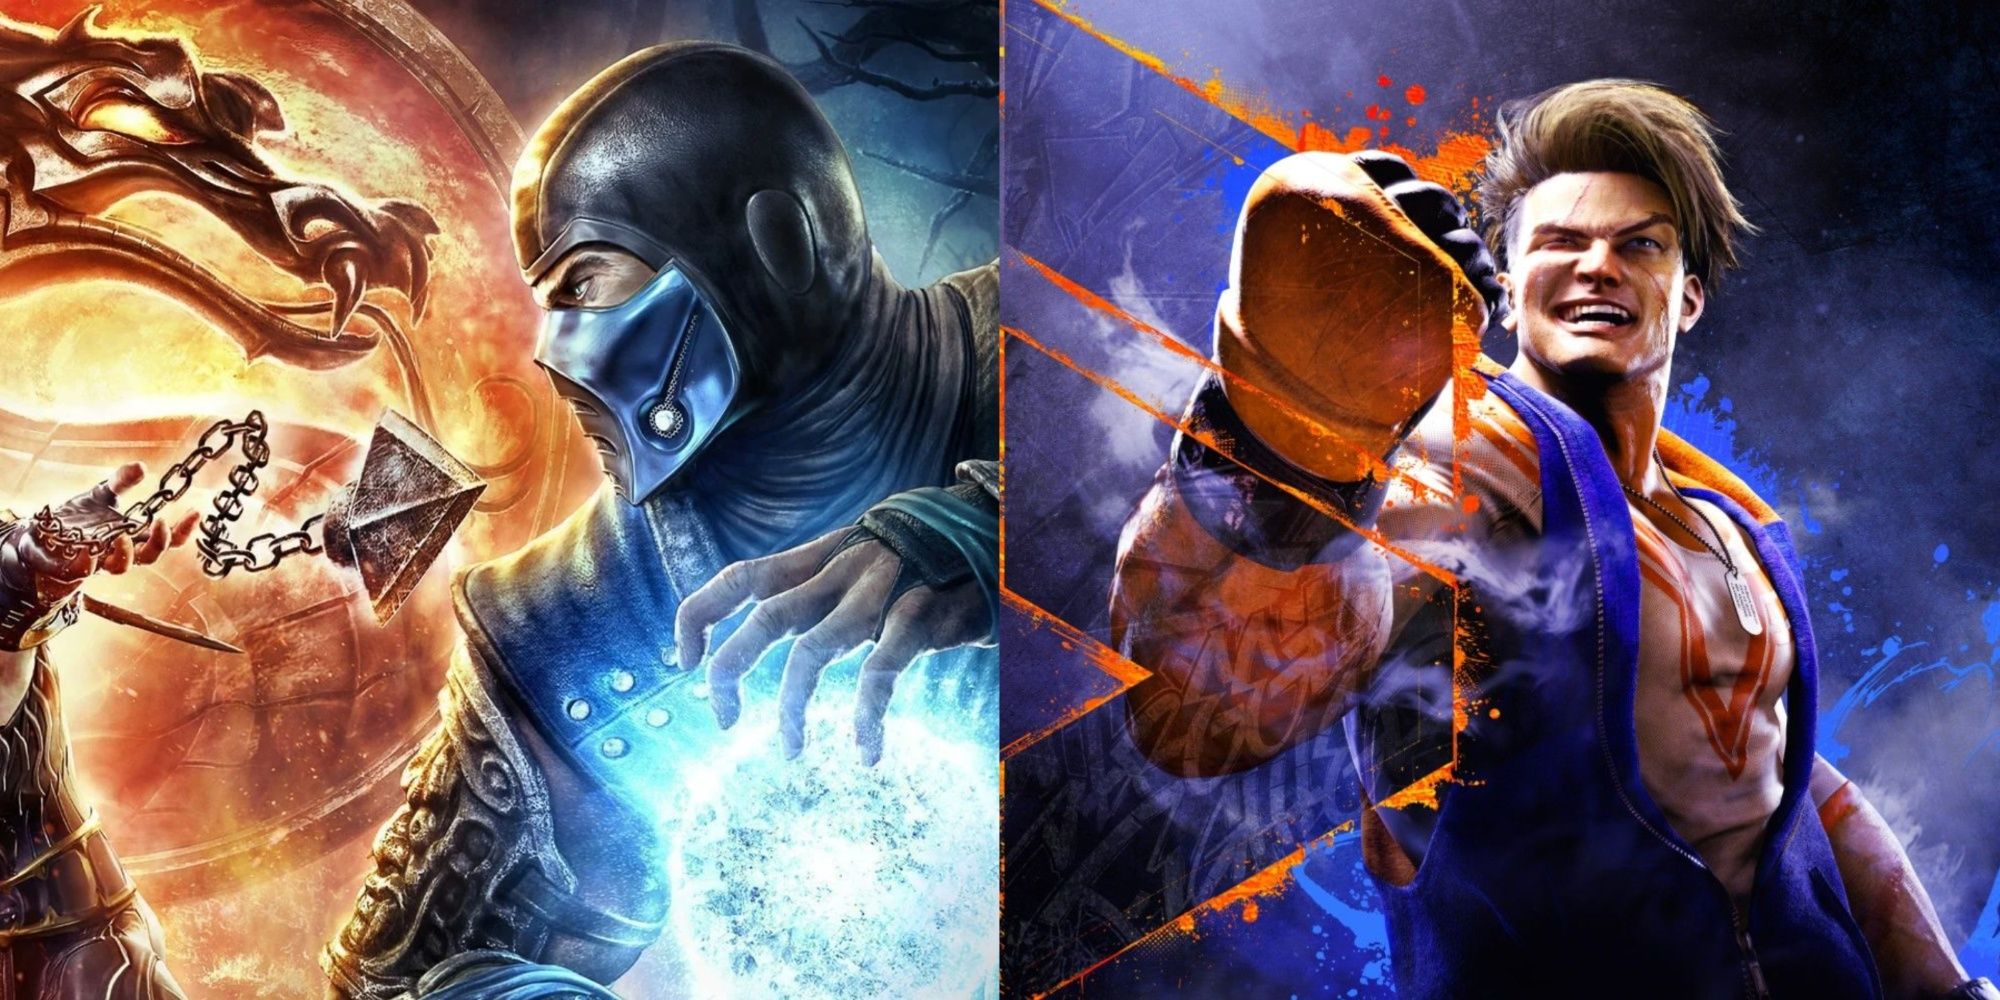 The box art to Mortal Kombat 9 and Street Fighter 6.